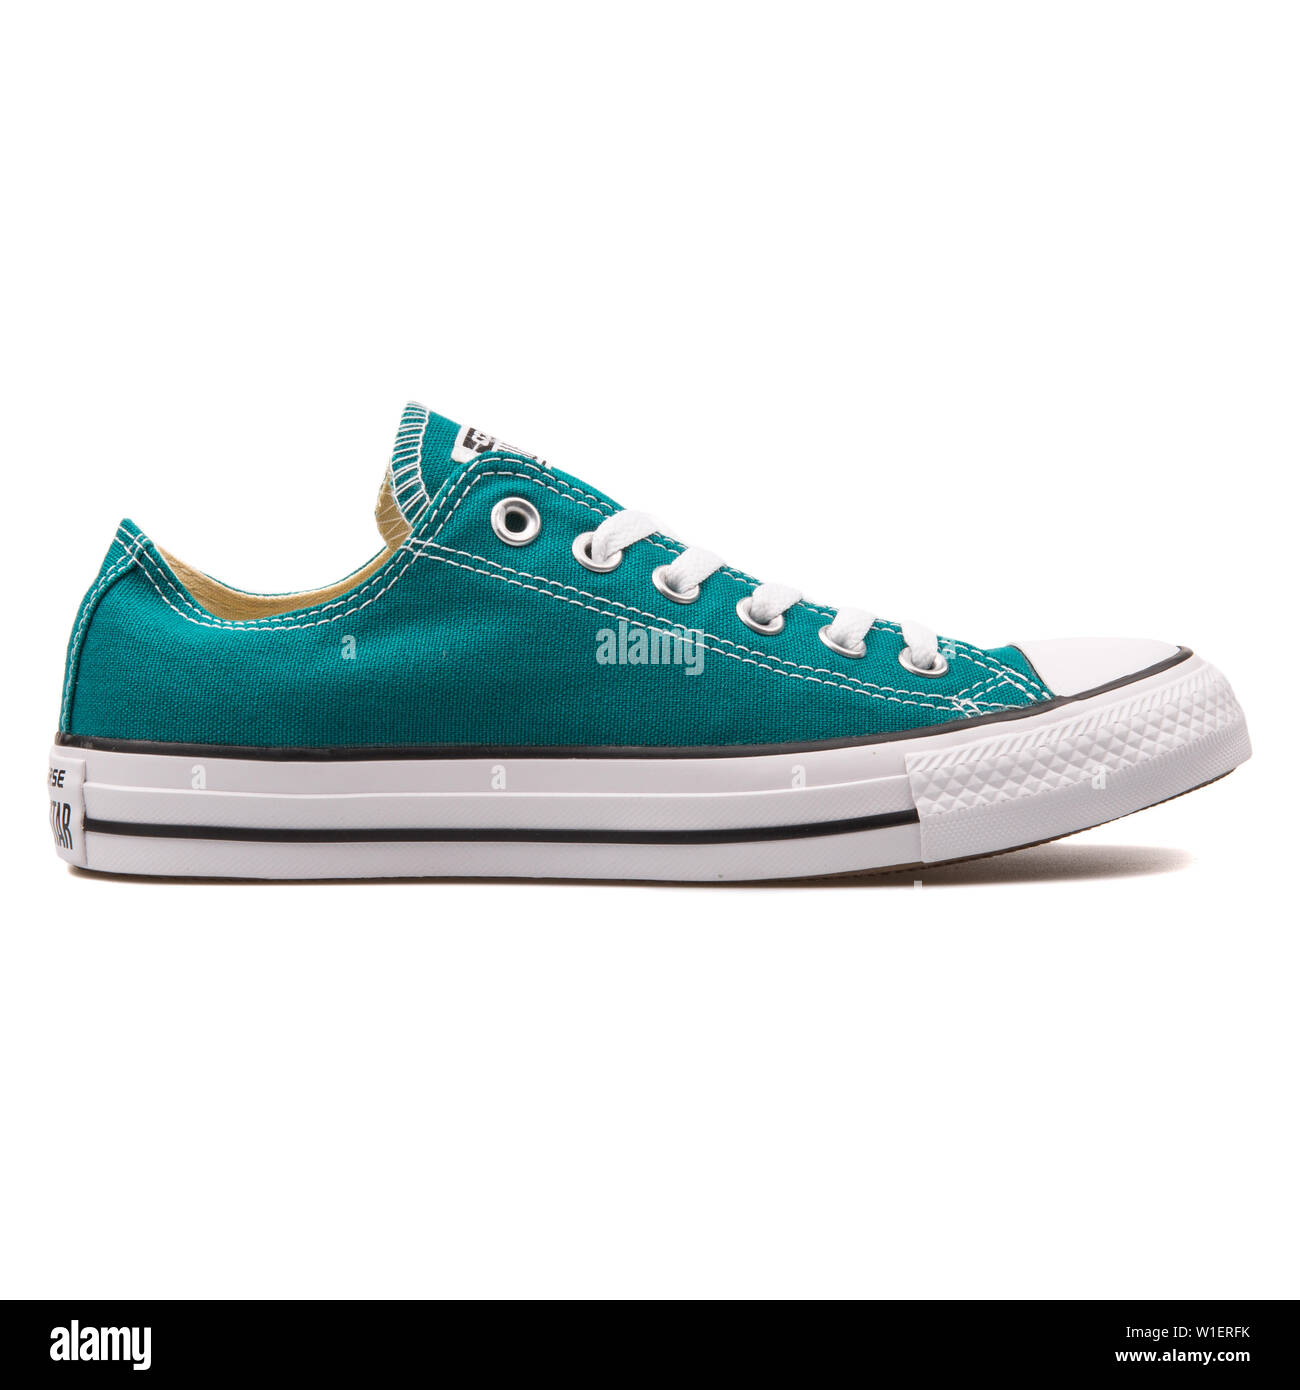 VIENNA, AUSTRIA - AUGUST 10, 2017: Converse Chuck Taylor All Star OX Rebel  teal sneaker on white background Stock Photo - Alamy